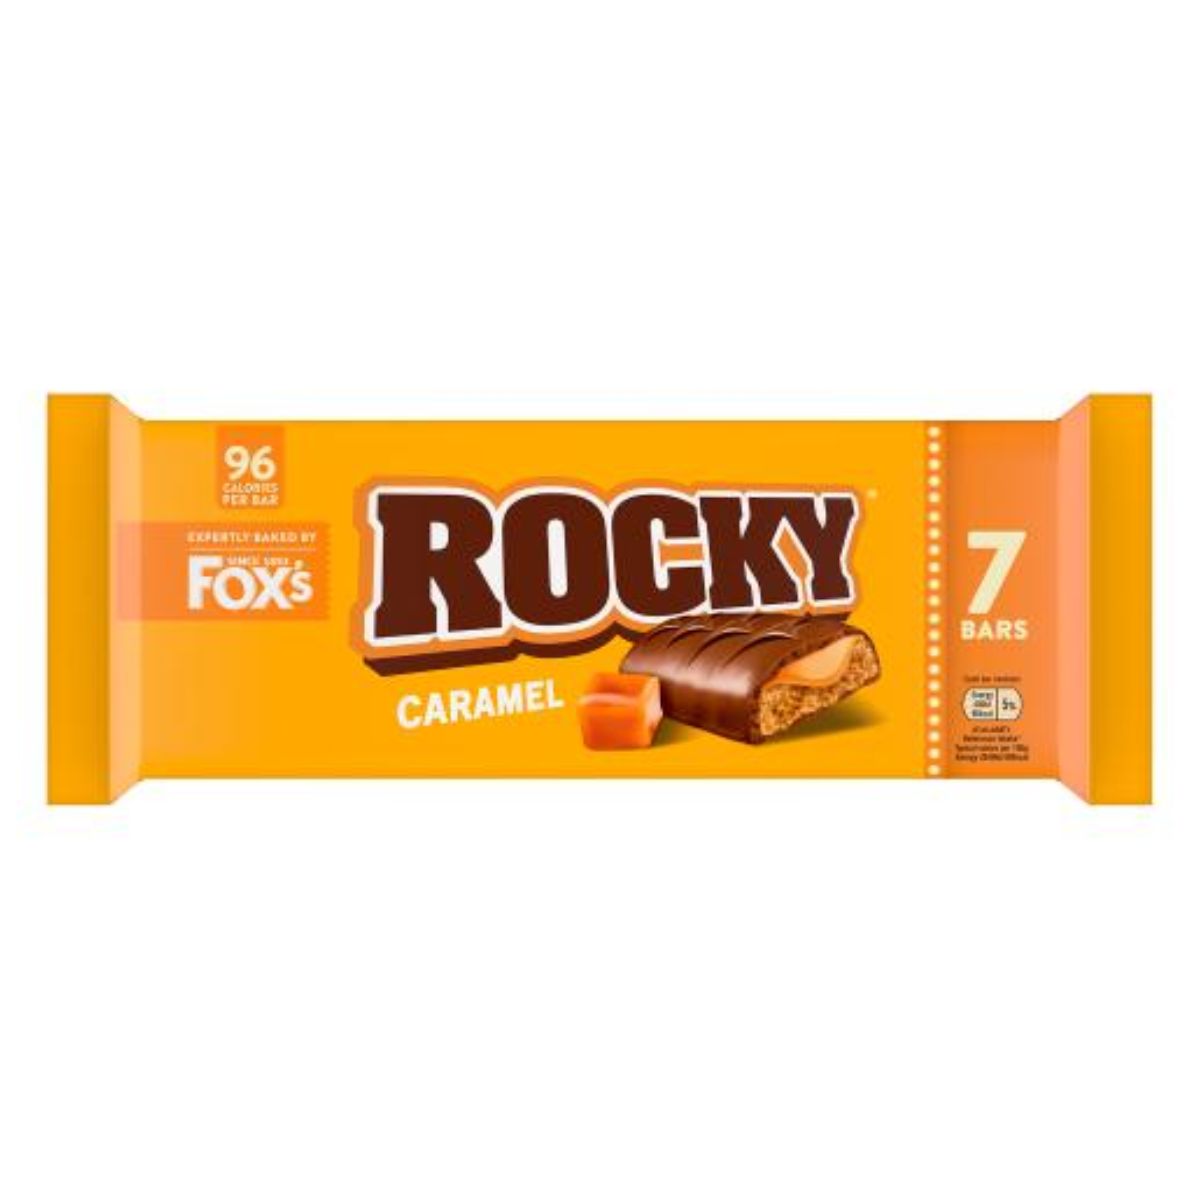 Packaging of Foxs - Rocky Caramel Bars - 7 x 19.5g, featuring the product logo and an image of the chocolate-covered caramel biscuit bar.